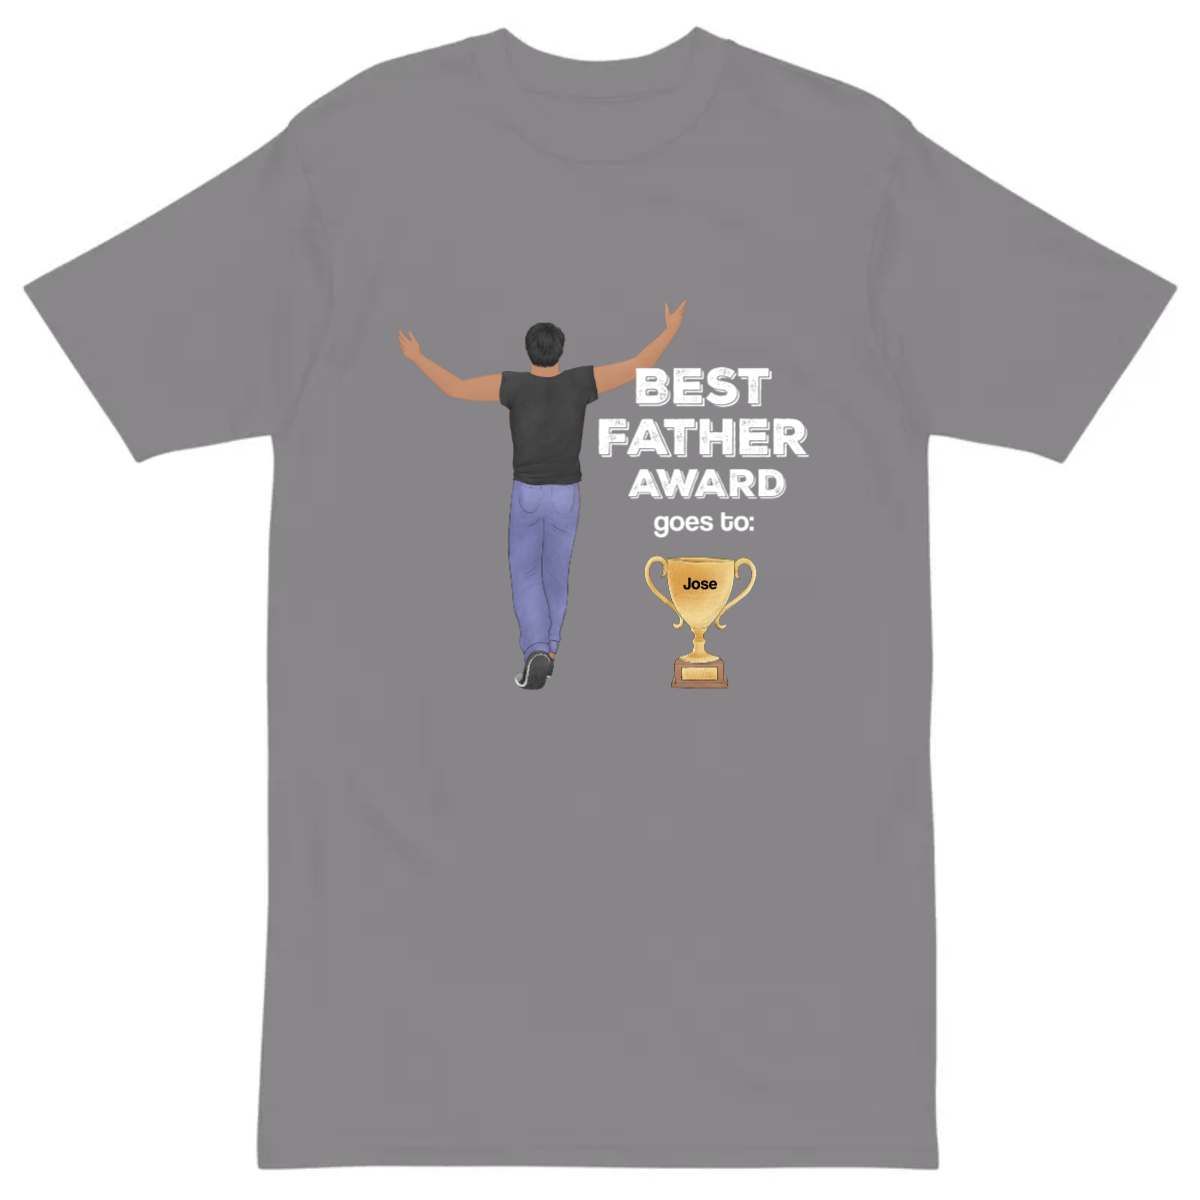 Buy the perfect best dad gift at Mighty Expressions.